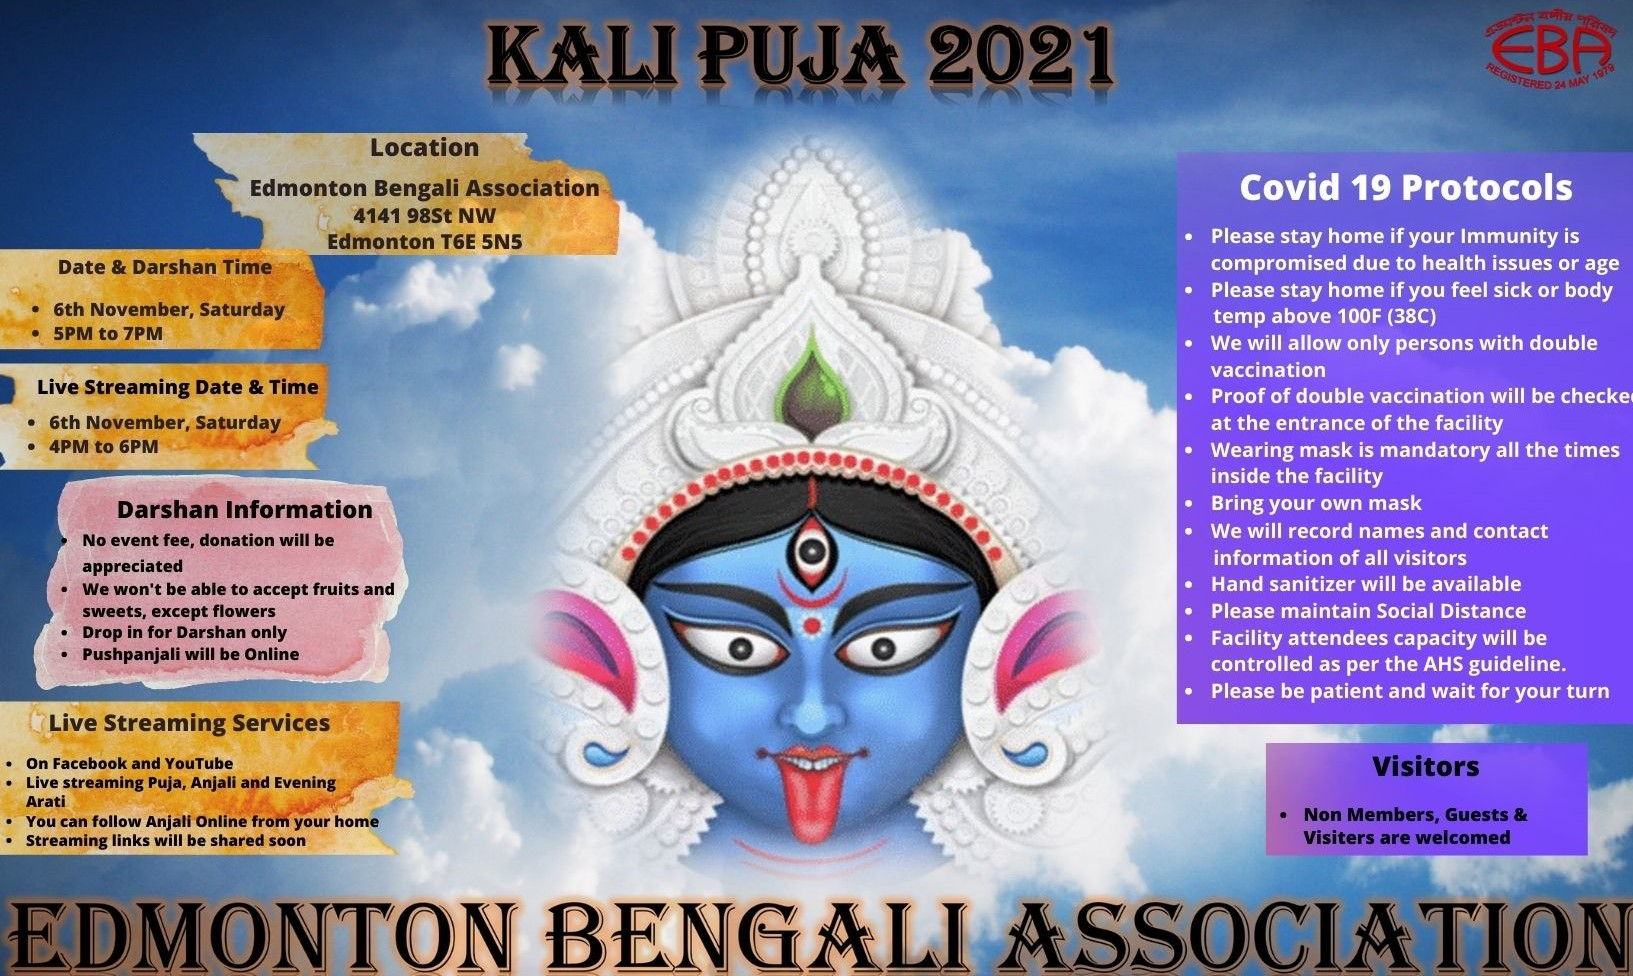 Kali Puja announcement, Annual membership and a Thank you for Durga Puja